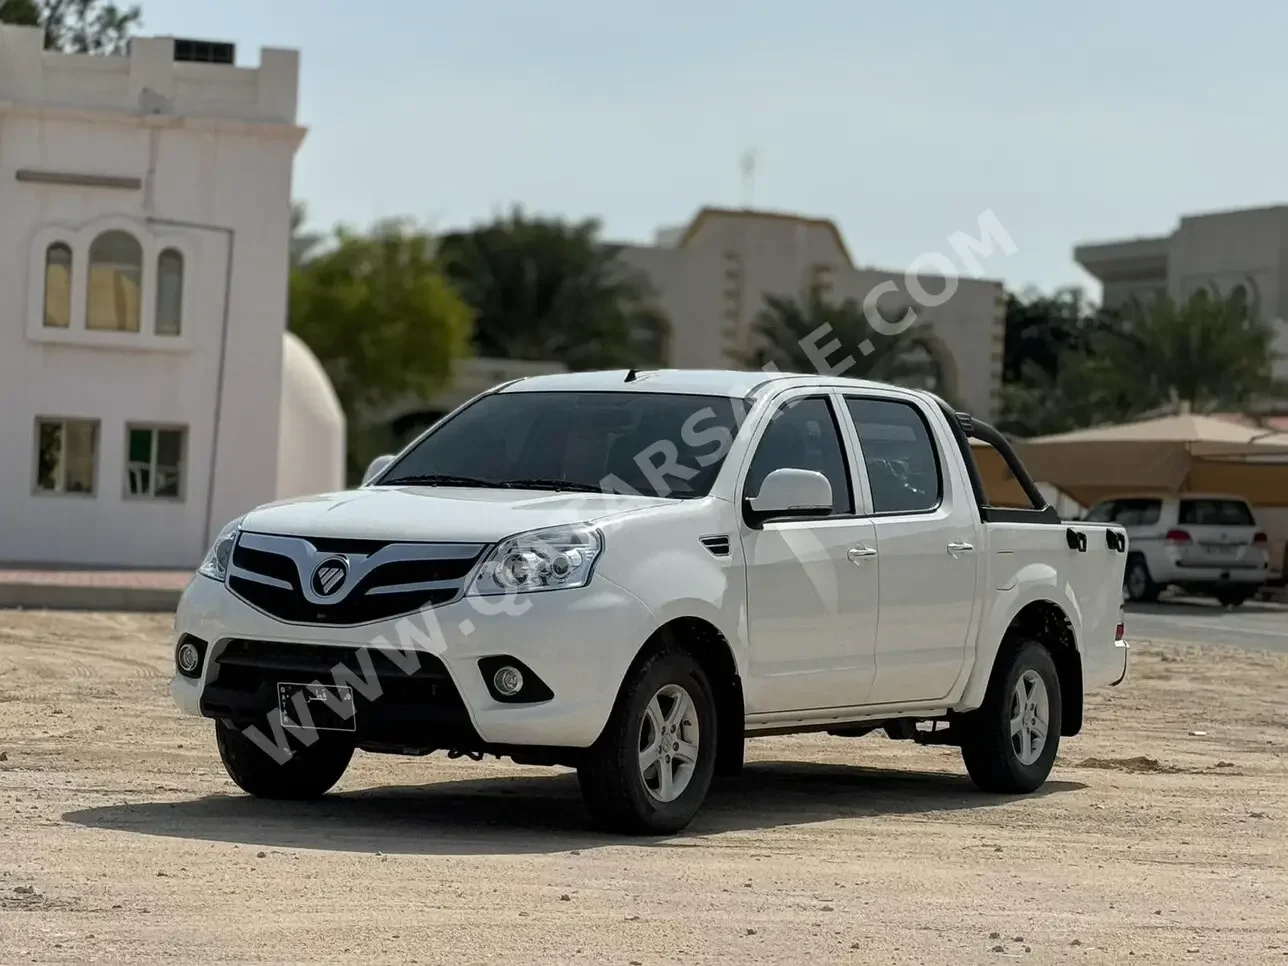 Foton  Pick up  Tunland  2020  Manual  0 Km  4 Cylinder  Front Wheel Drive (FWD)  Pick Up  White  With Warranty